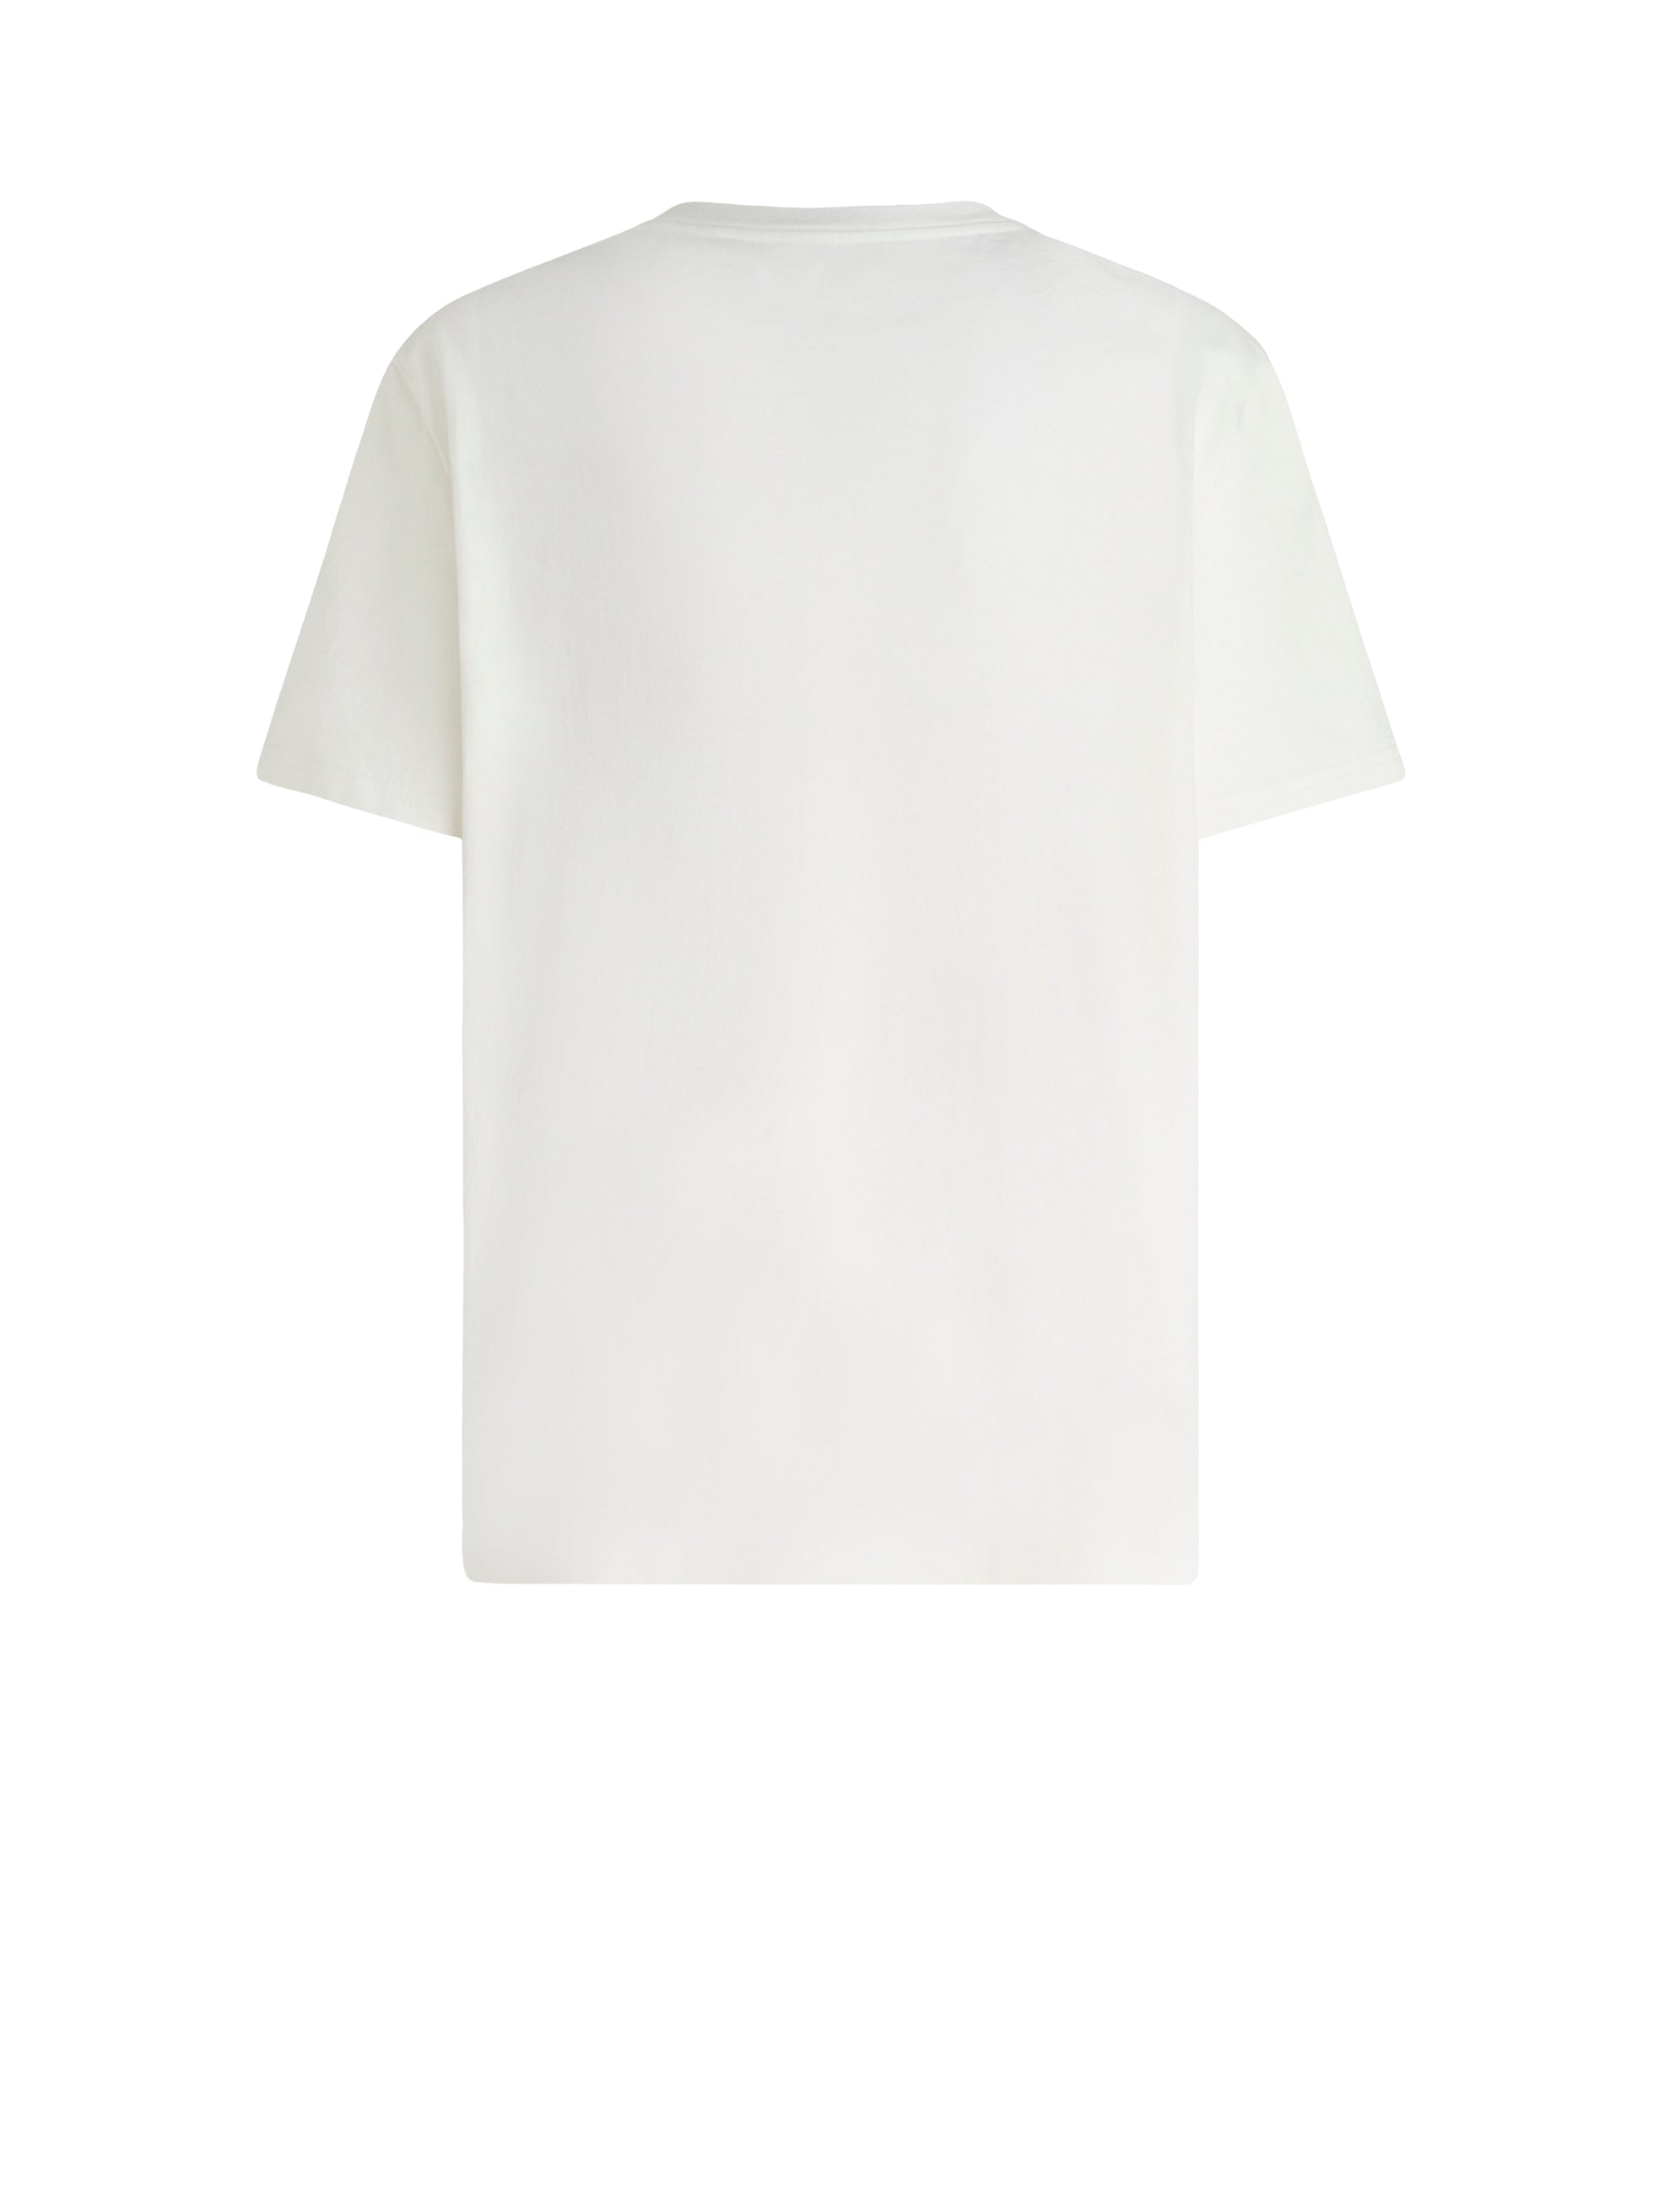 T-shirt with embroidery - Etro